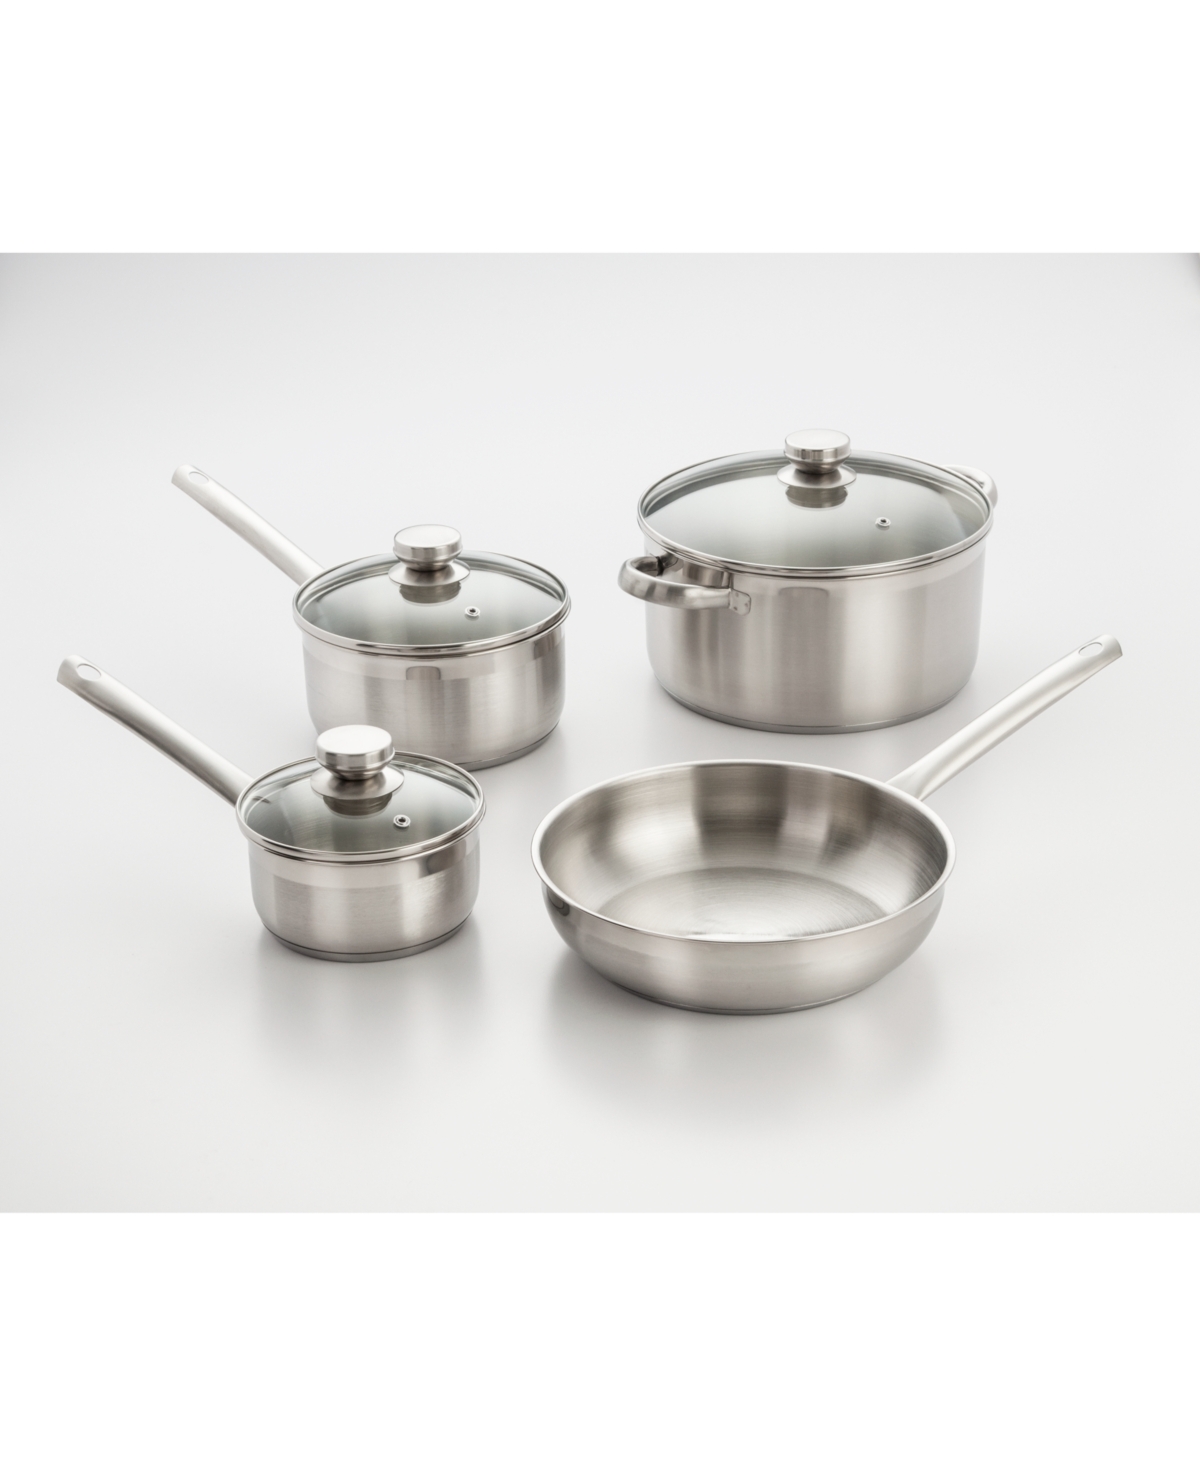 Cookpro 503 Steel Cookware Set 7Pc Encapsulated Base